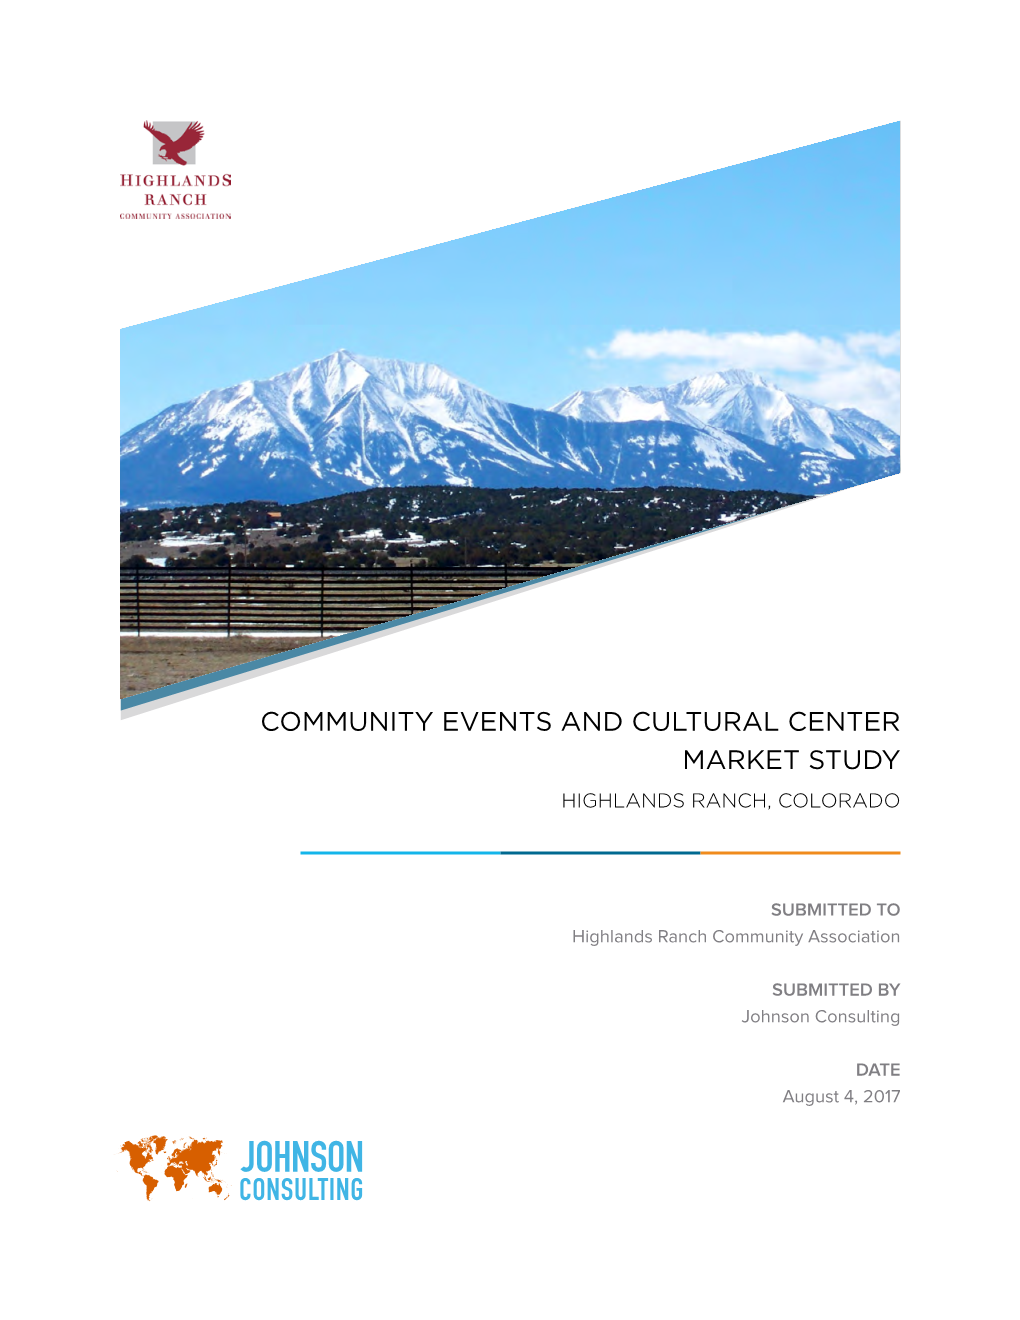 Community Events and Cultural Center Market Study Highlands Ranch, Colorado